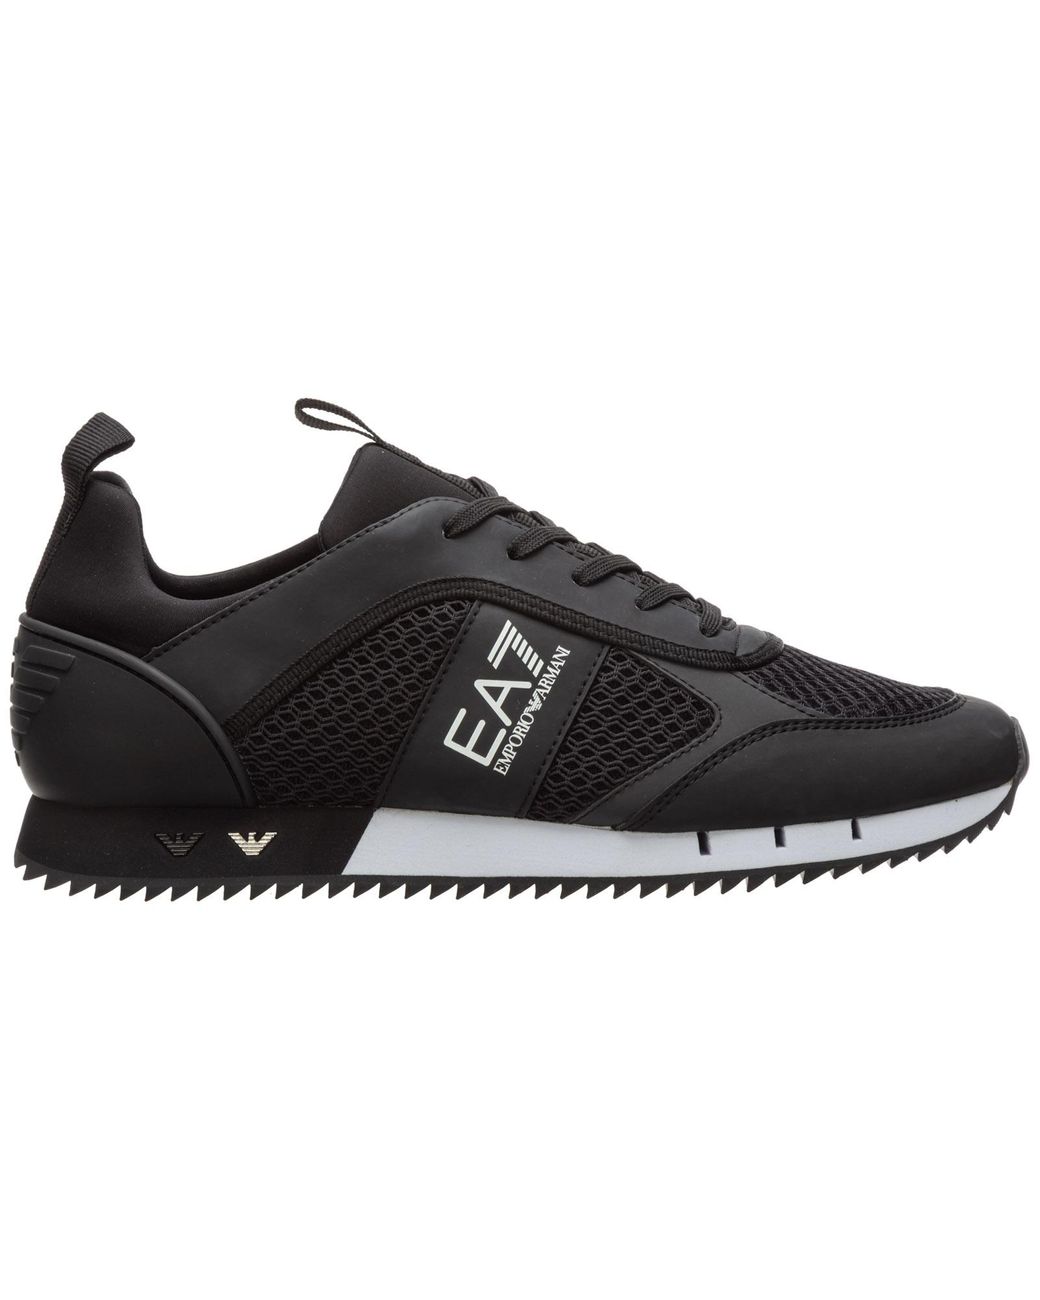 EA7 Men's Shoes Trainers Sneakers in Black for Men - Lyst